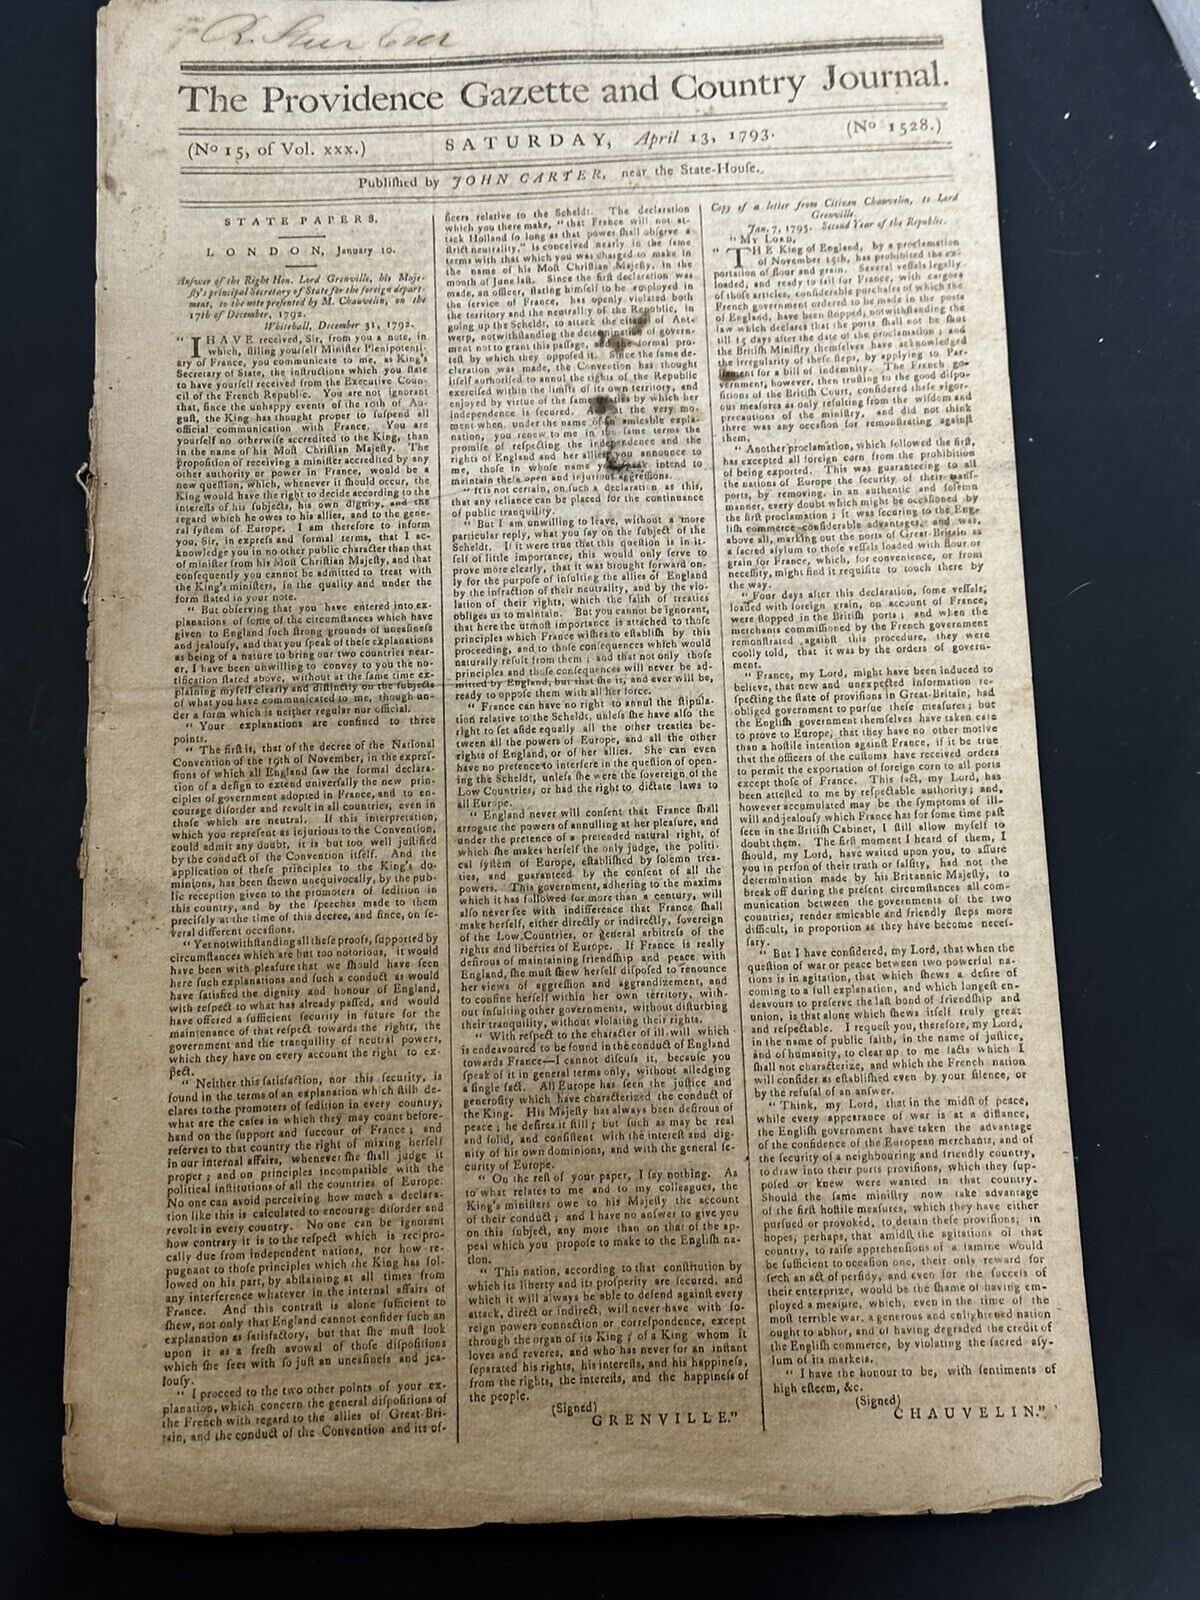 Saturday April 13 1793 The Providence Gazette & Country Journal Newspaper 230yrs